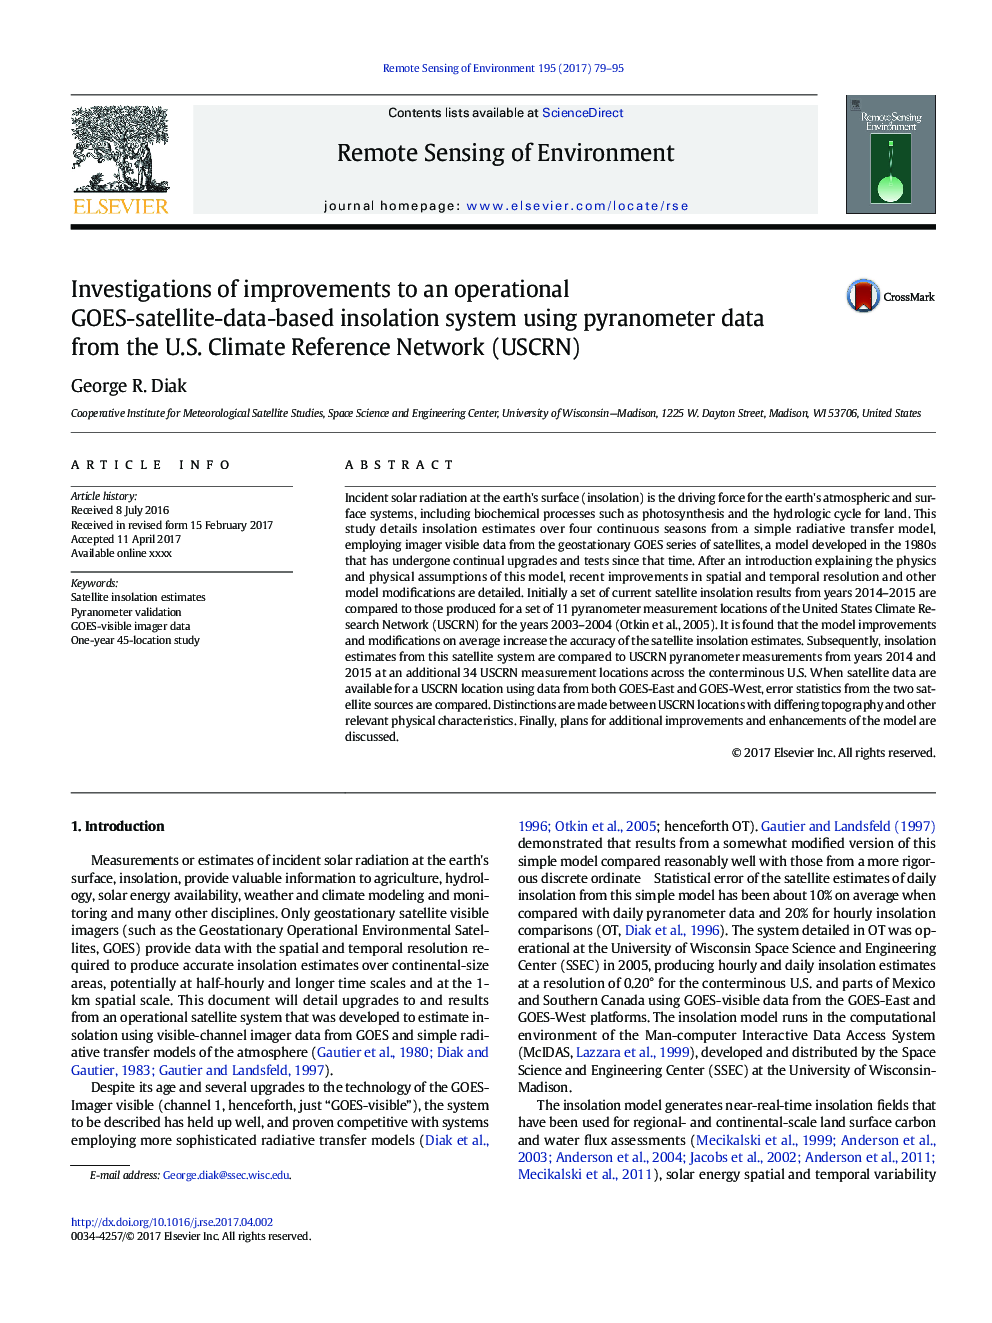 Investigations of improvements to an operational GOES-satellite-data-based insolation system using pyranometer data from the U.S. Climate Reference Network (USCRN)